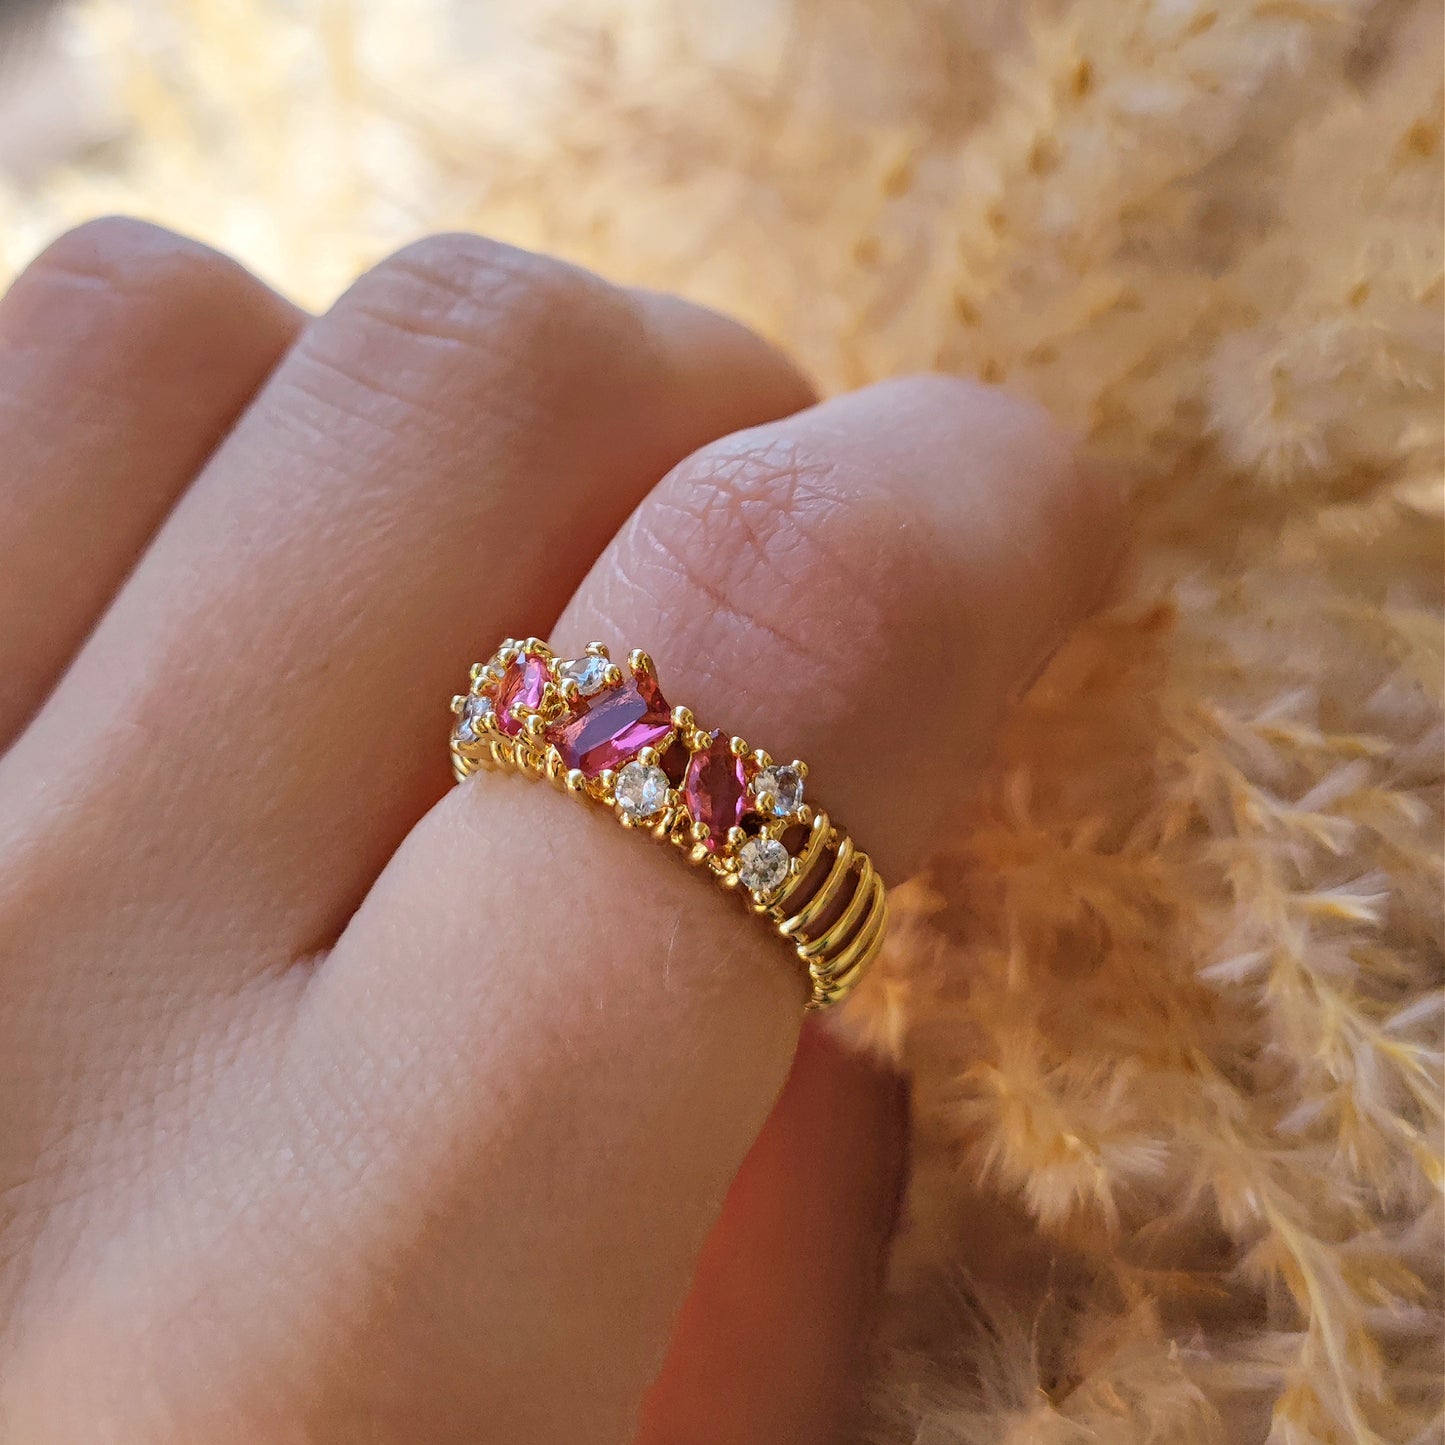 Adjustable Ring "Persephone" in gold plated brass and cubic zirconia